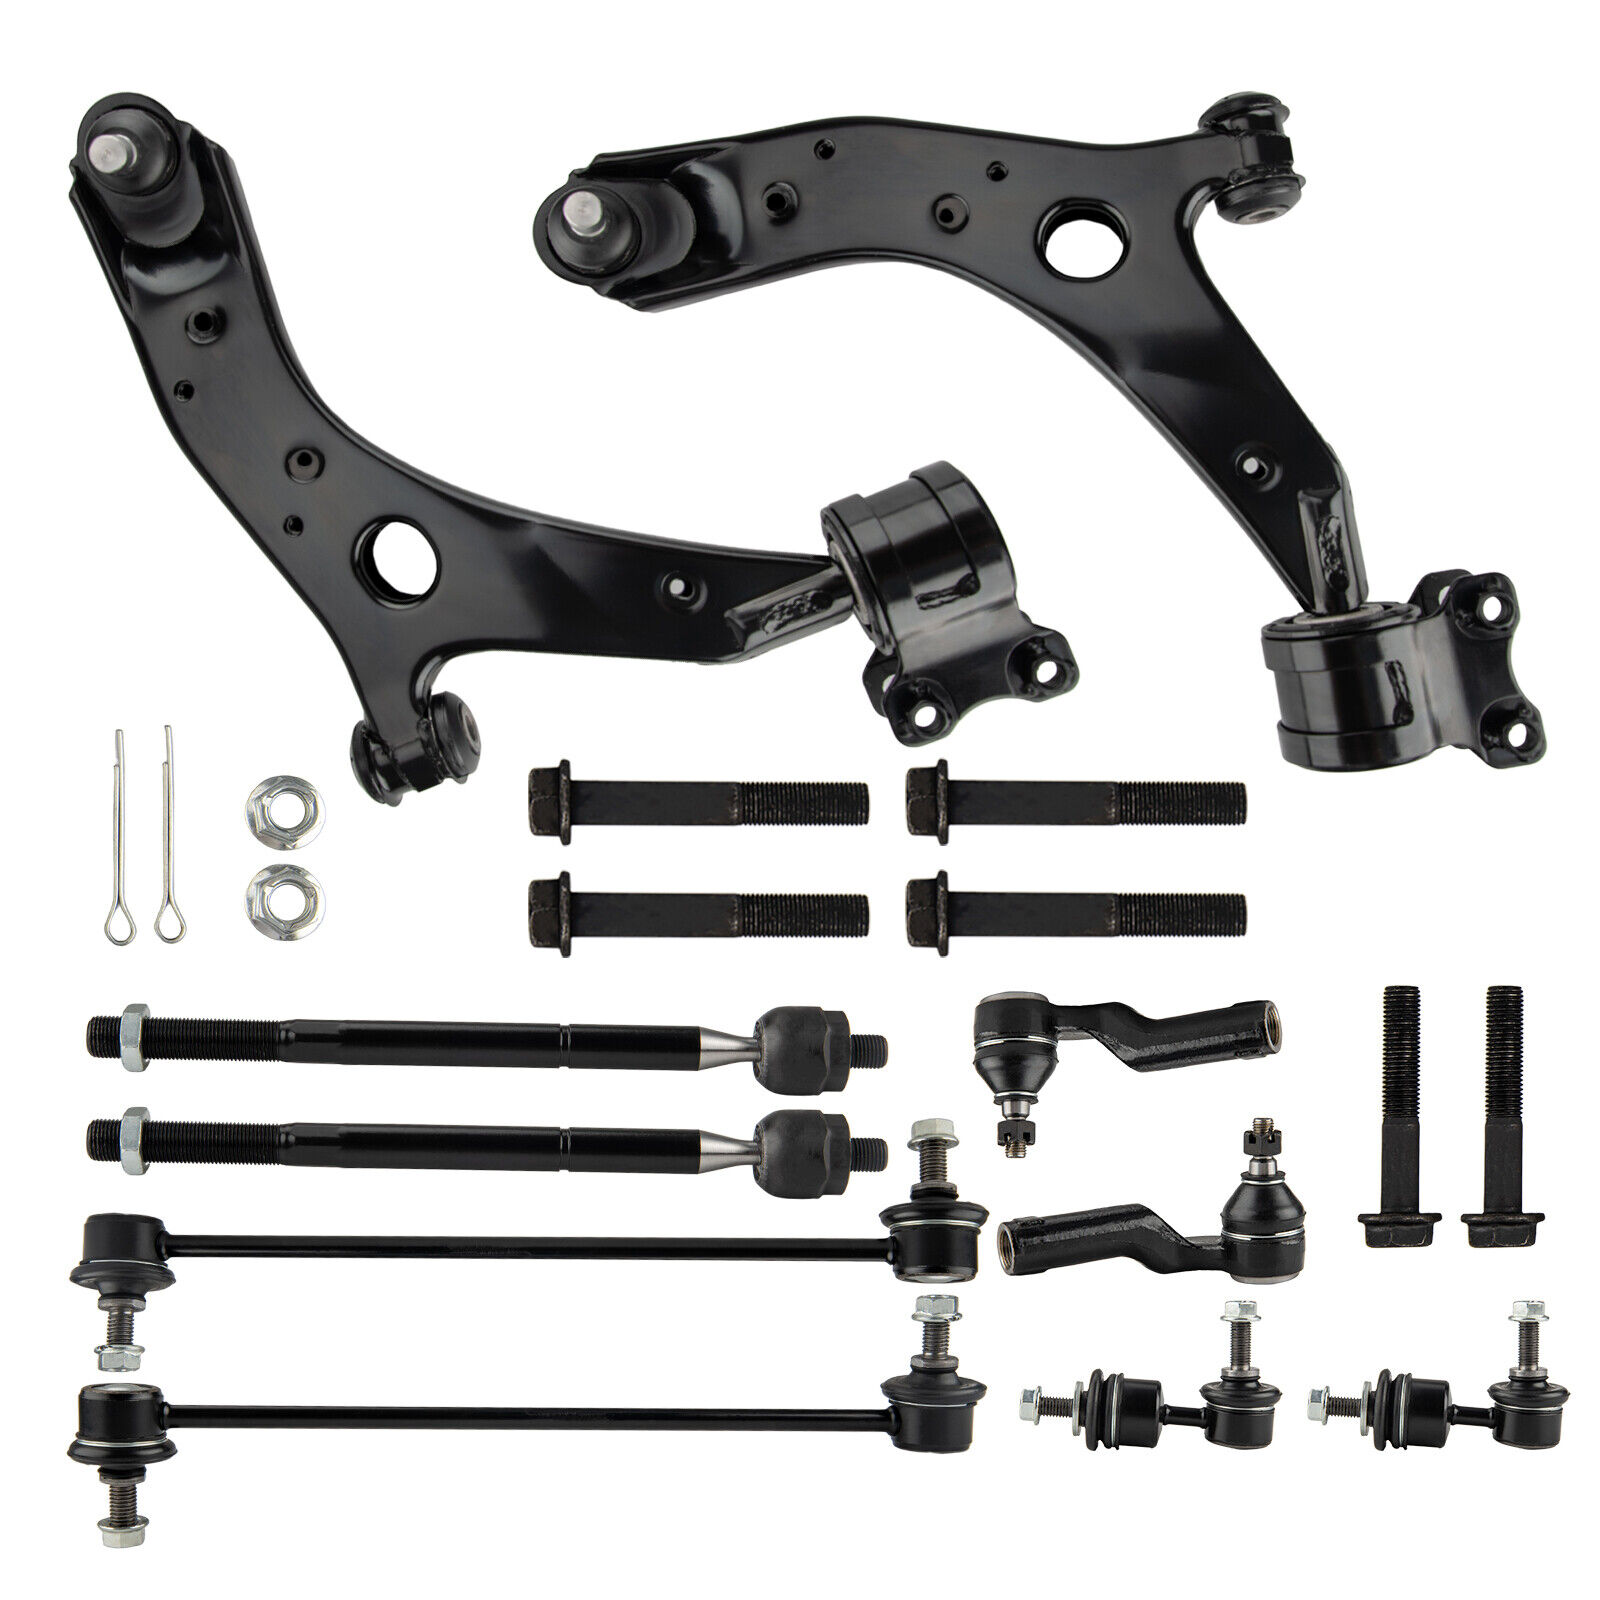 10pcs NEW Front Control Arms Kit for 2004-2009 MAZDA 3/2006-2014 MAZDA 5